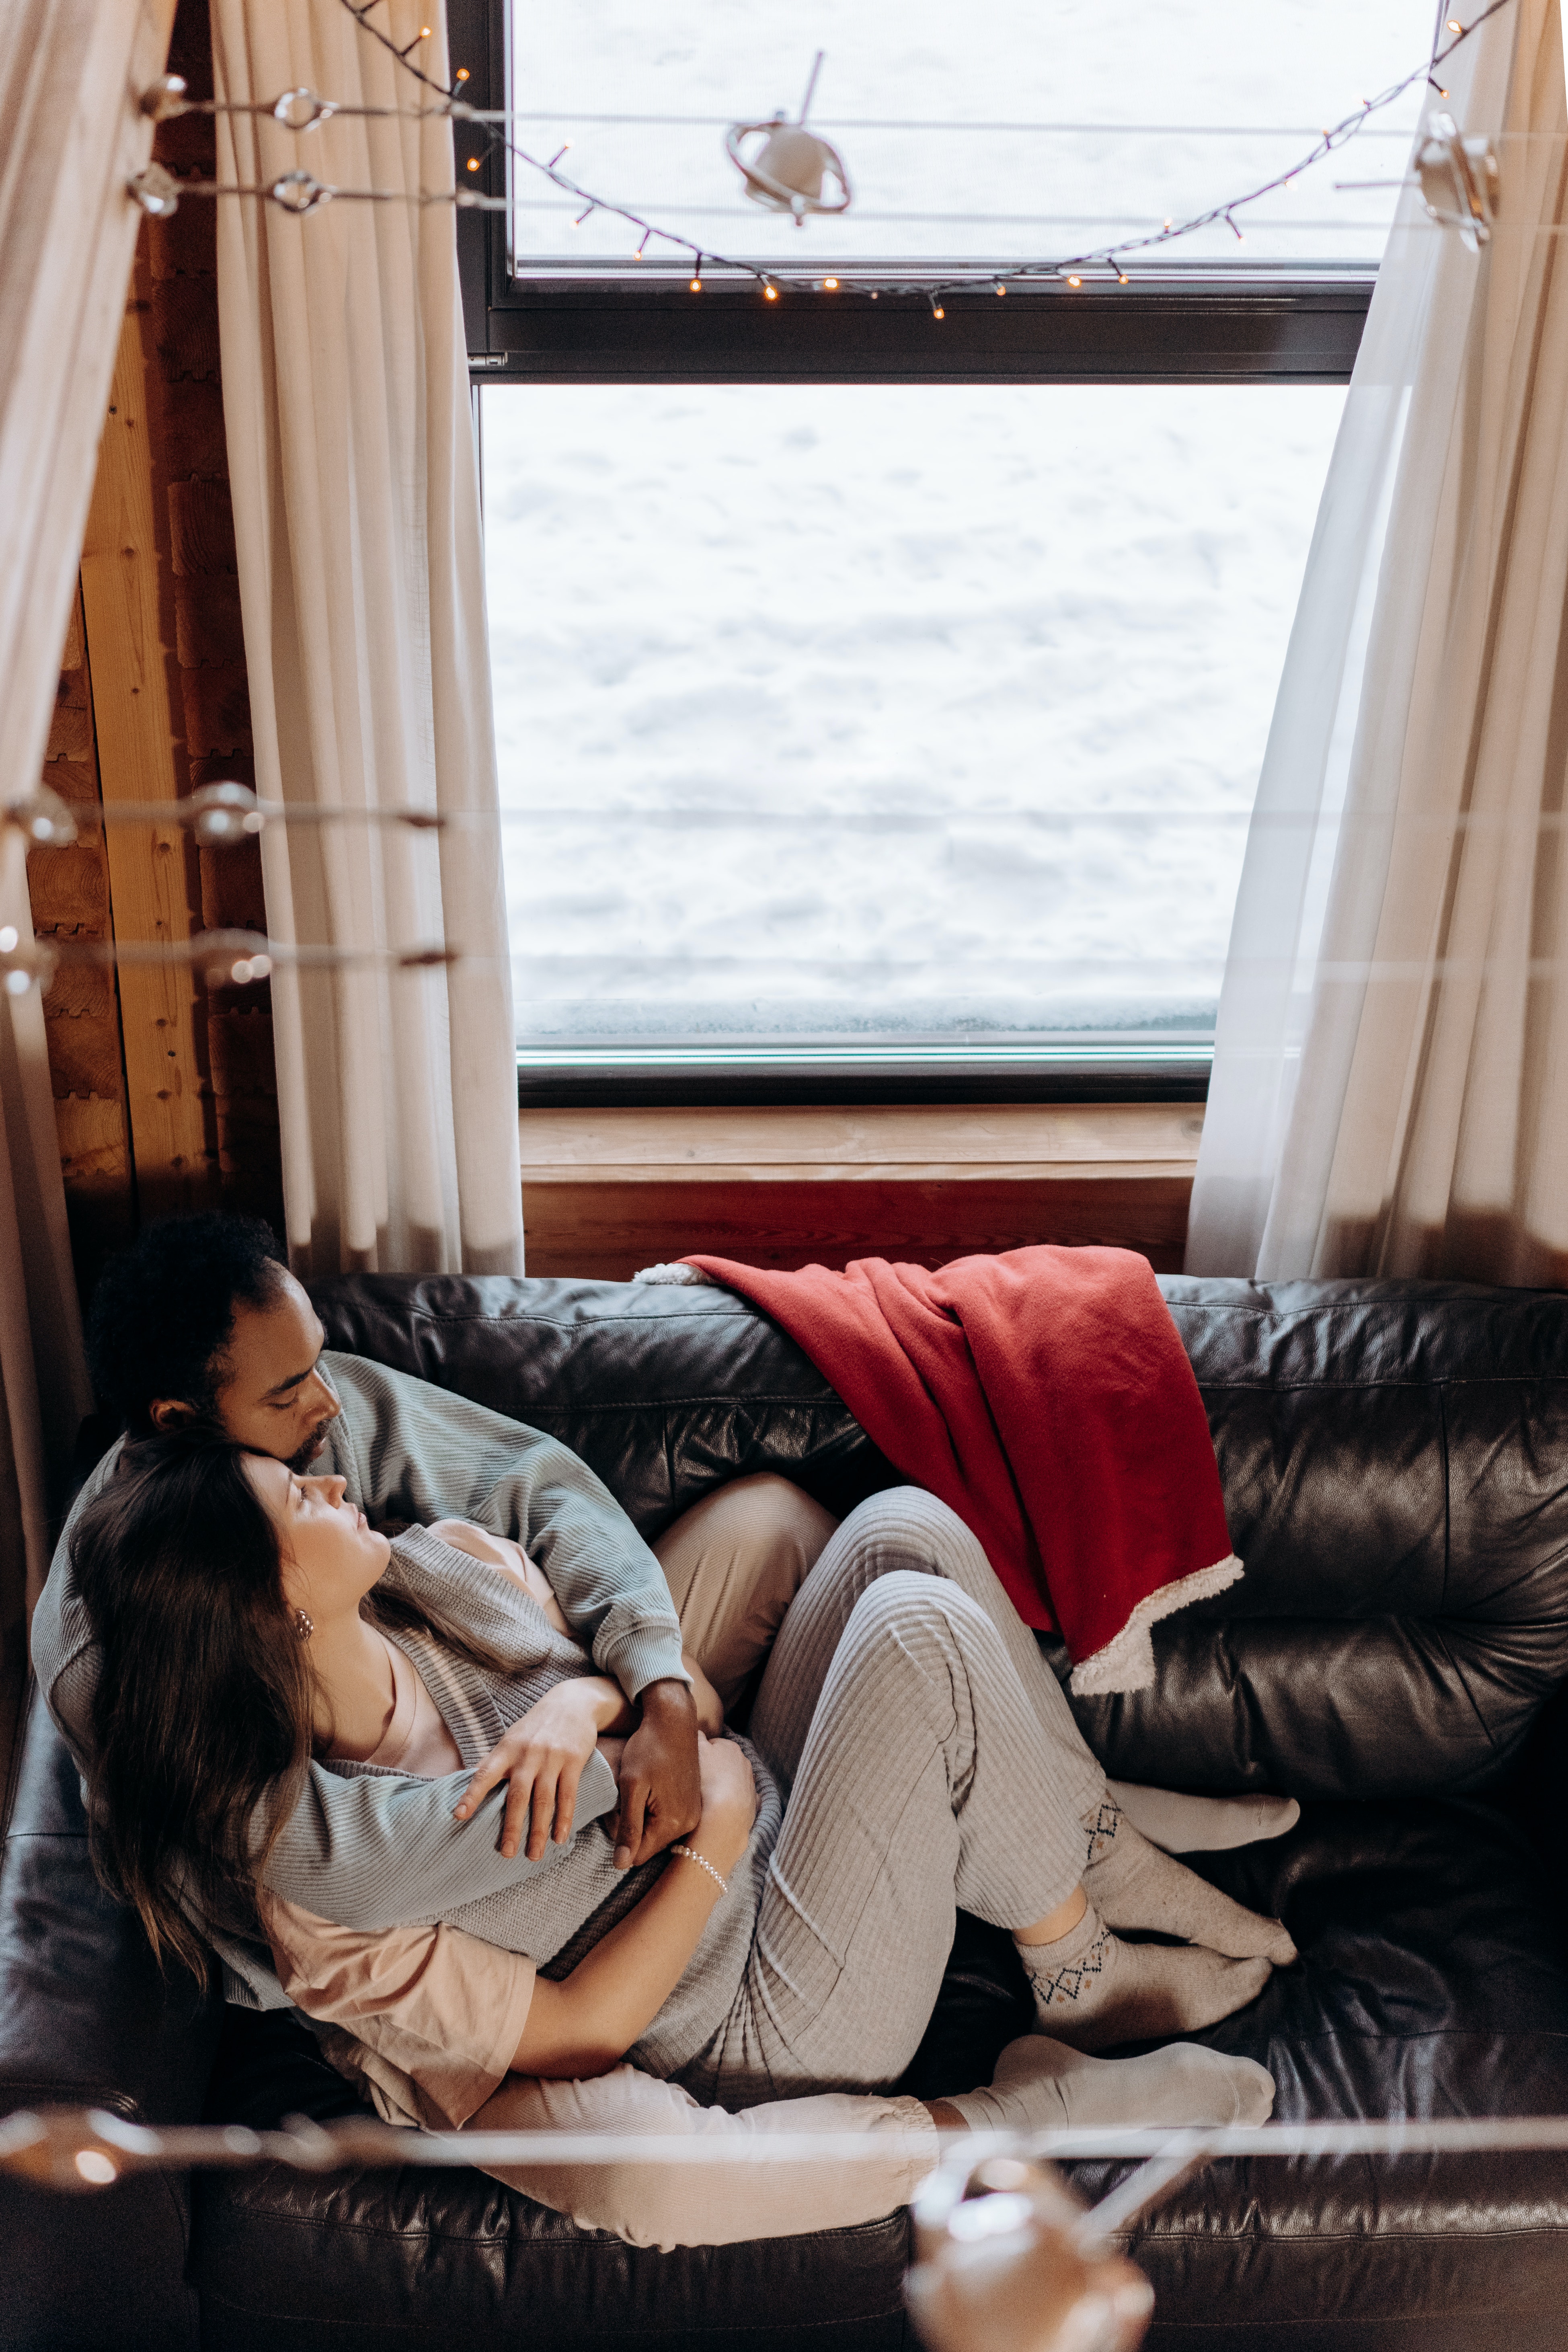 A couple lying on a couch together. | Source: Pexels